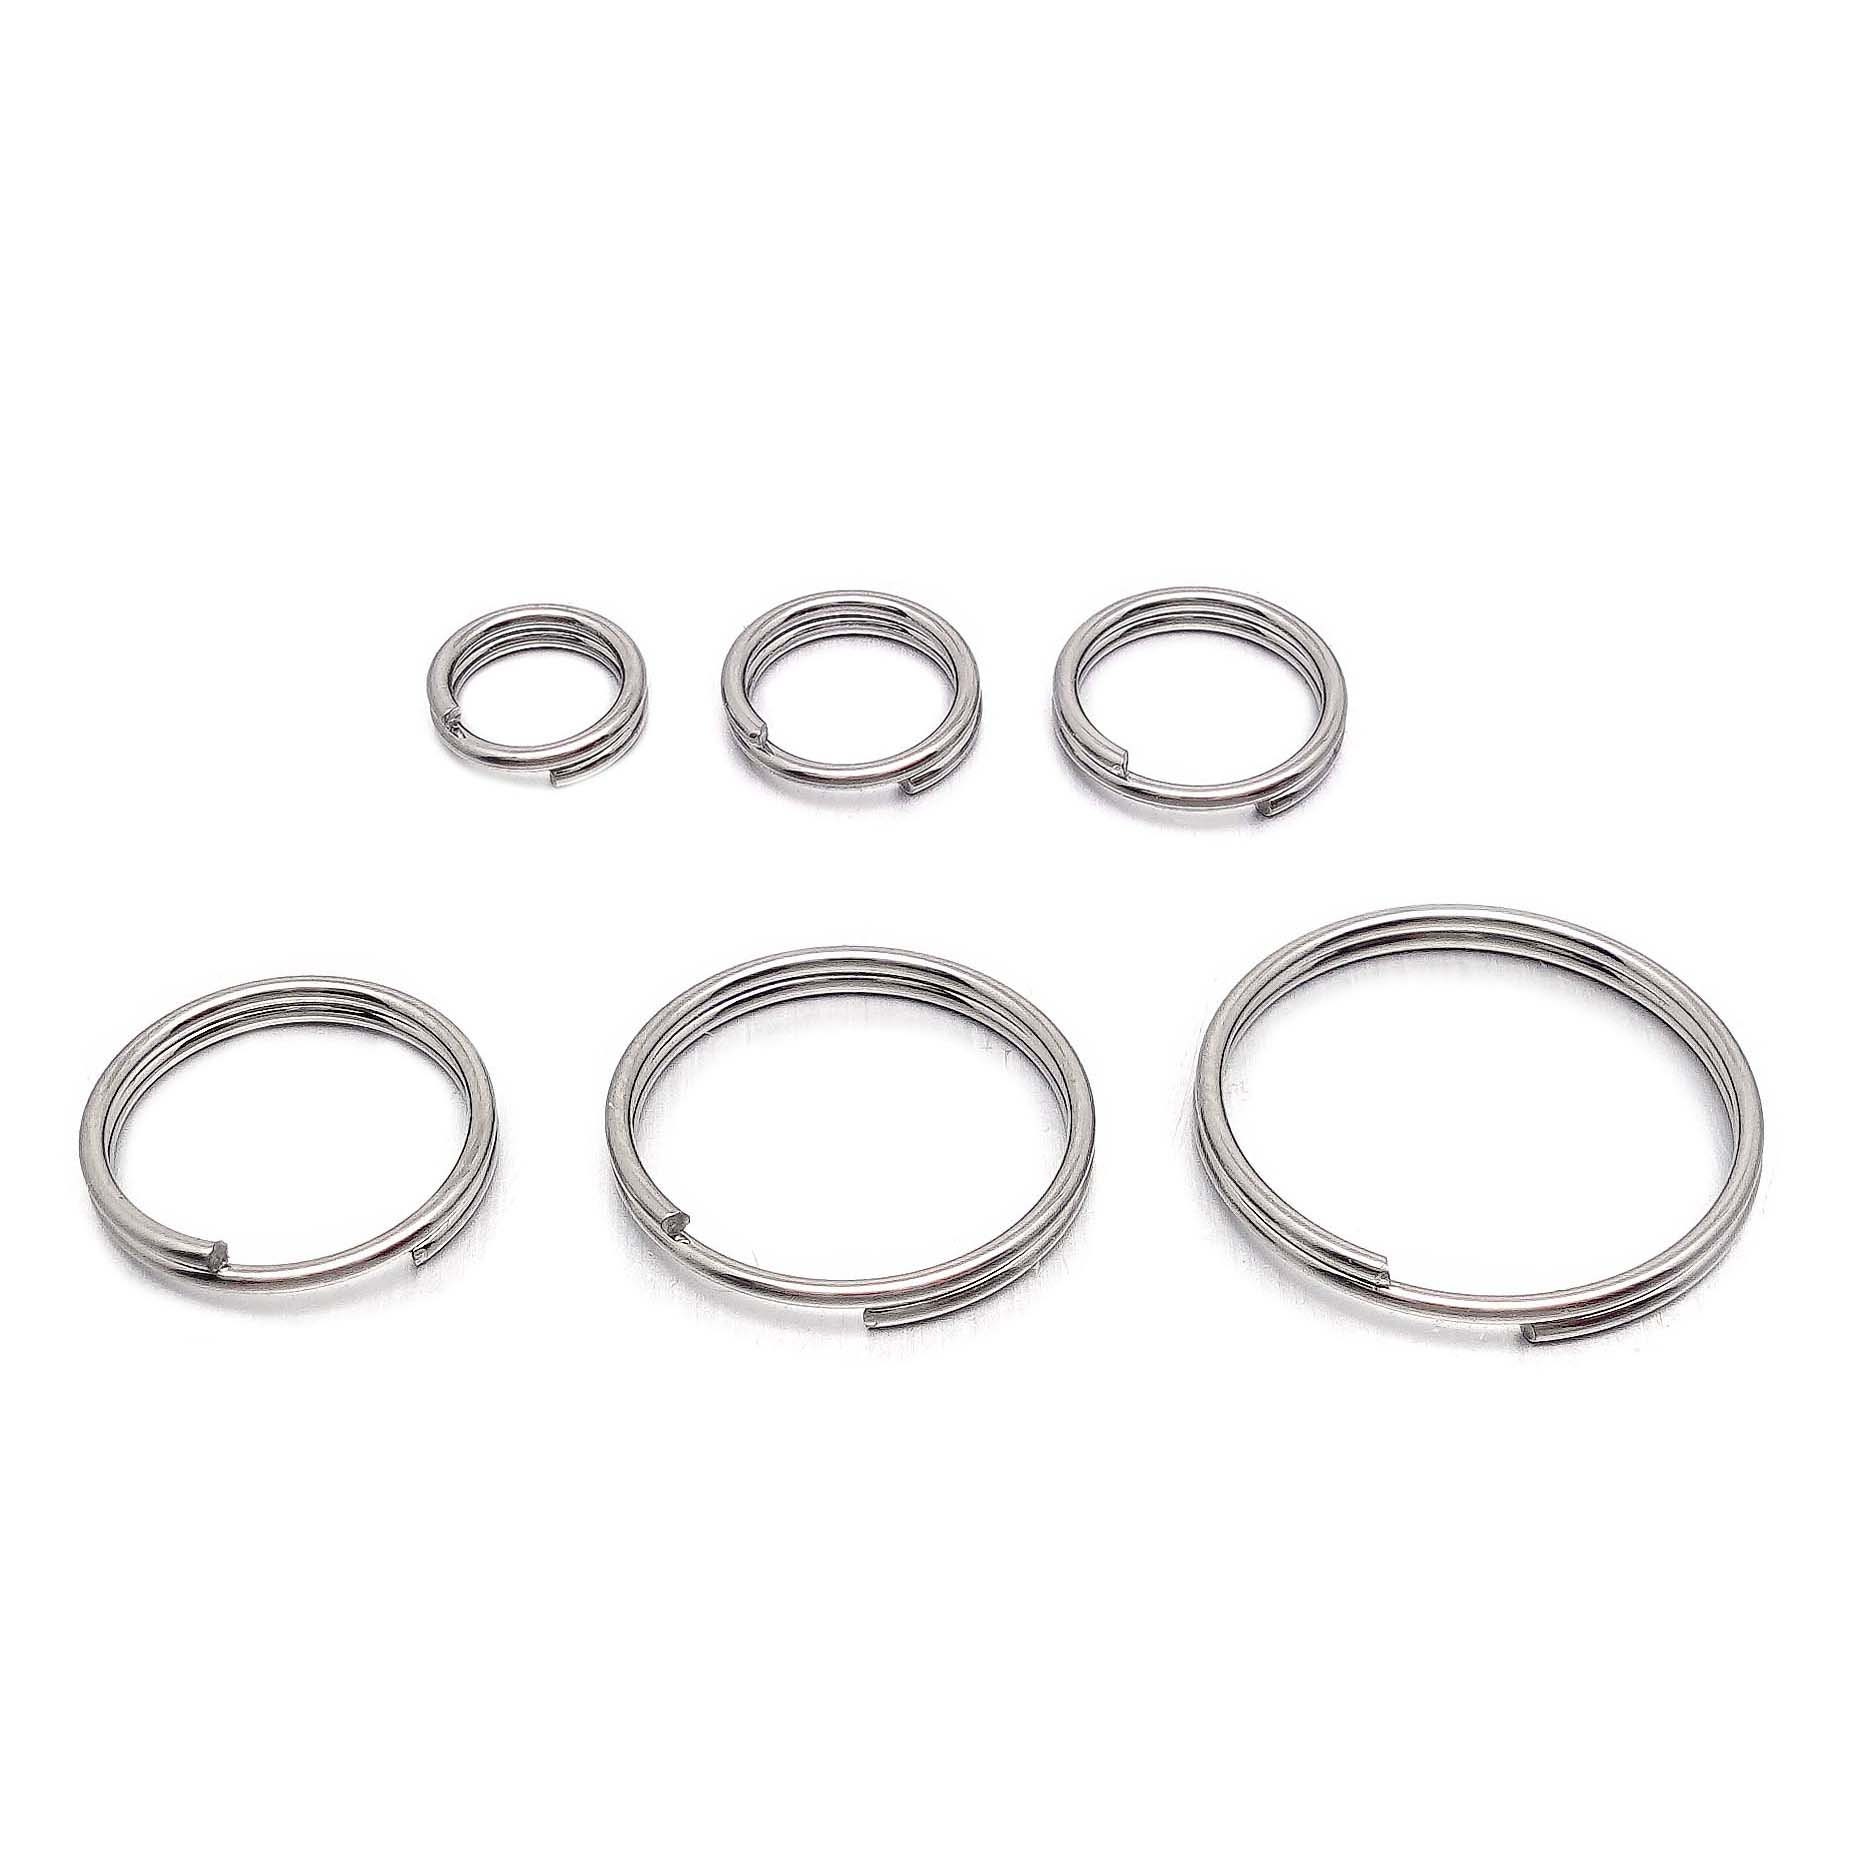 U Pick 20pcs Sterling Silver Round Double Loop Split Jump Rings 5mm 6 7 8mm  wire 0.6mm/ 22 Gauge for Bracelet Jewelry Craft Charm Making 